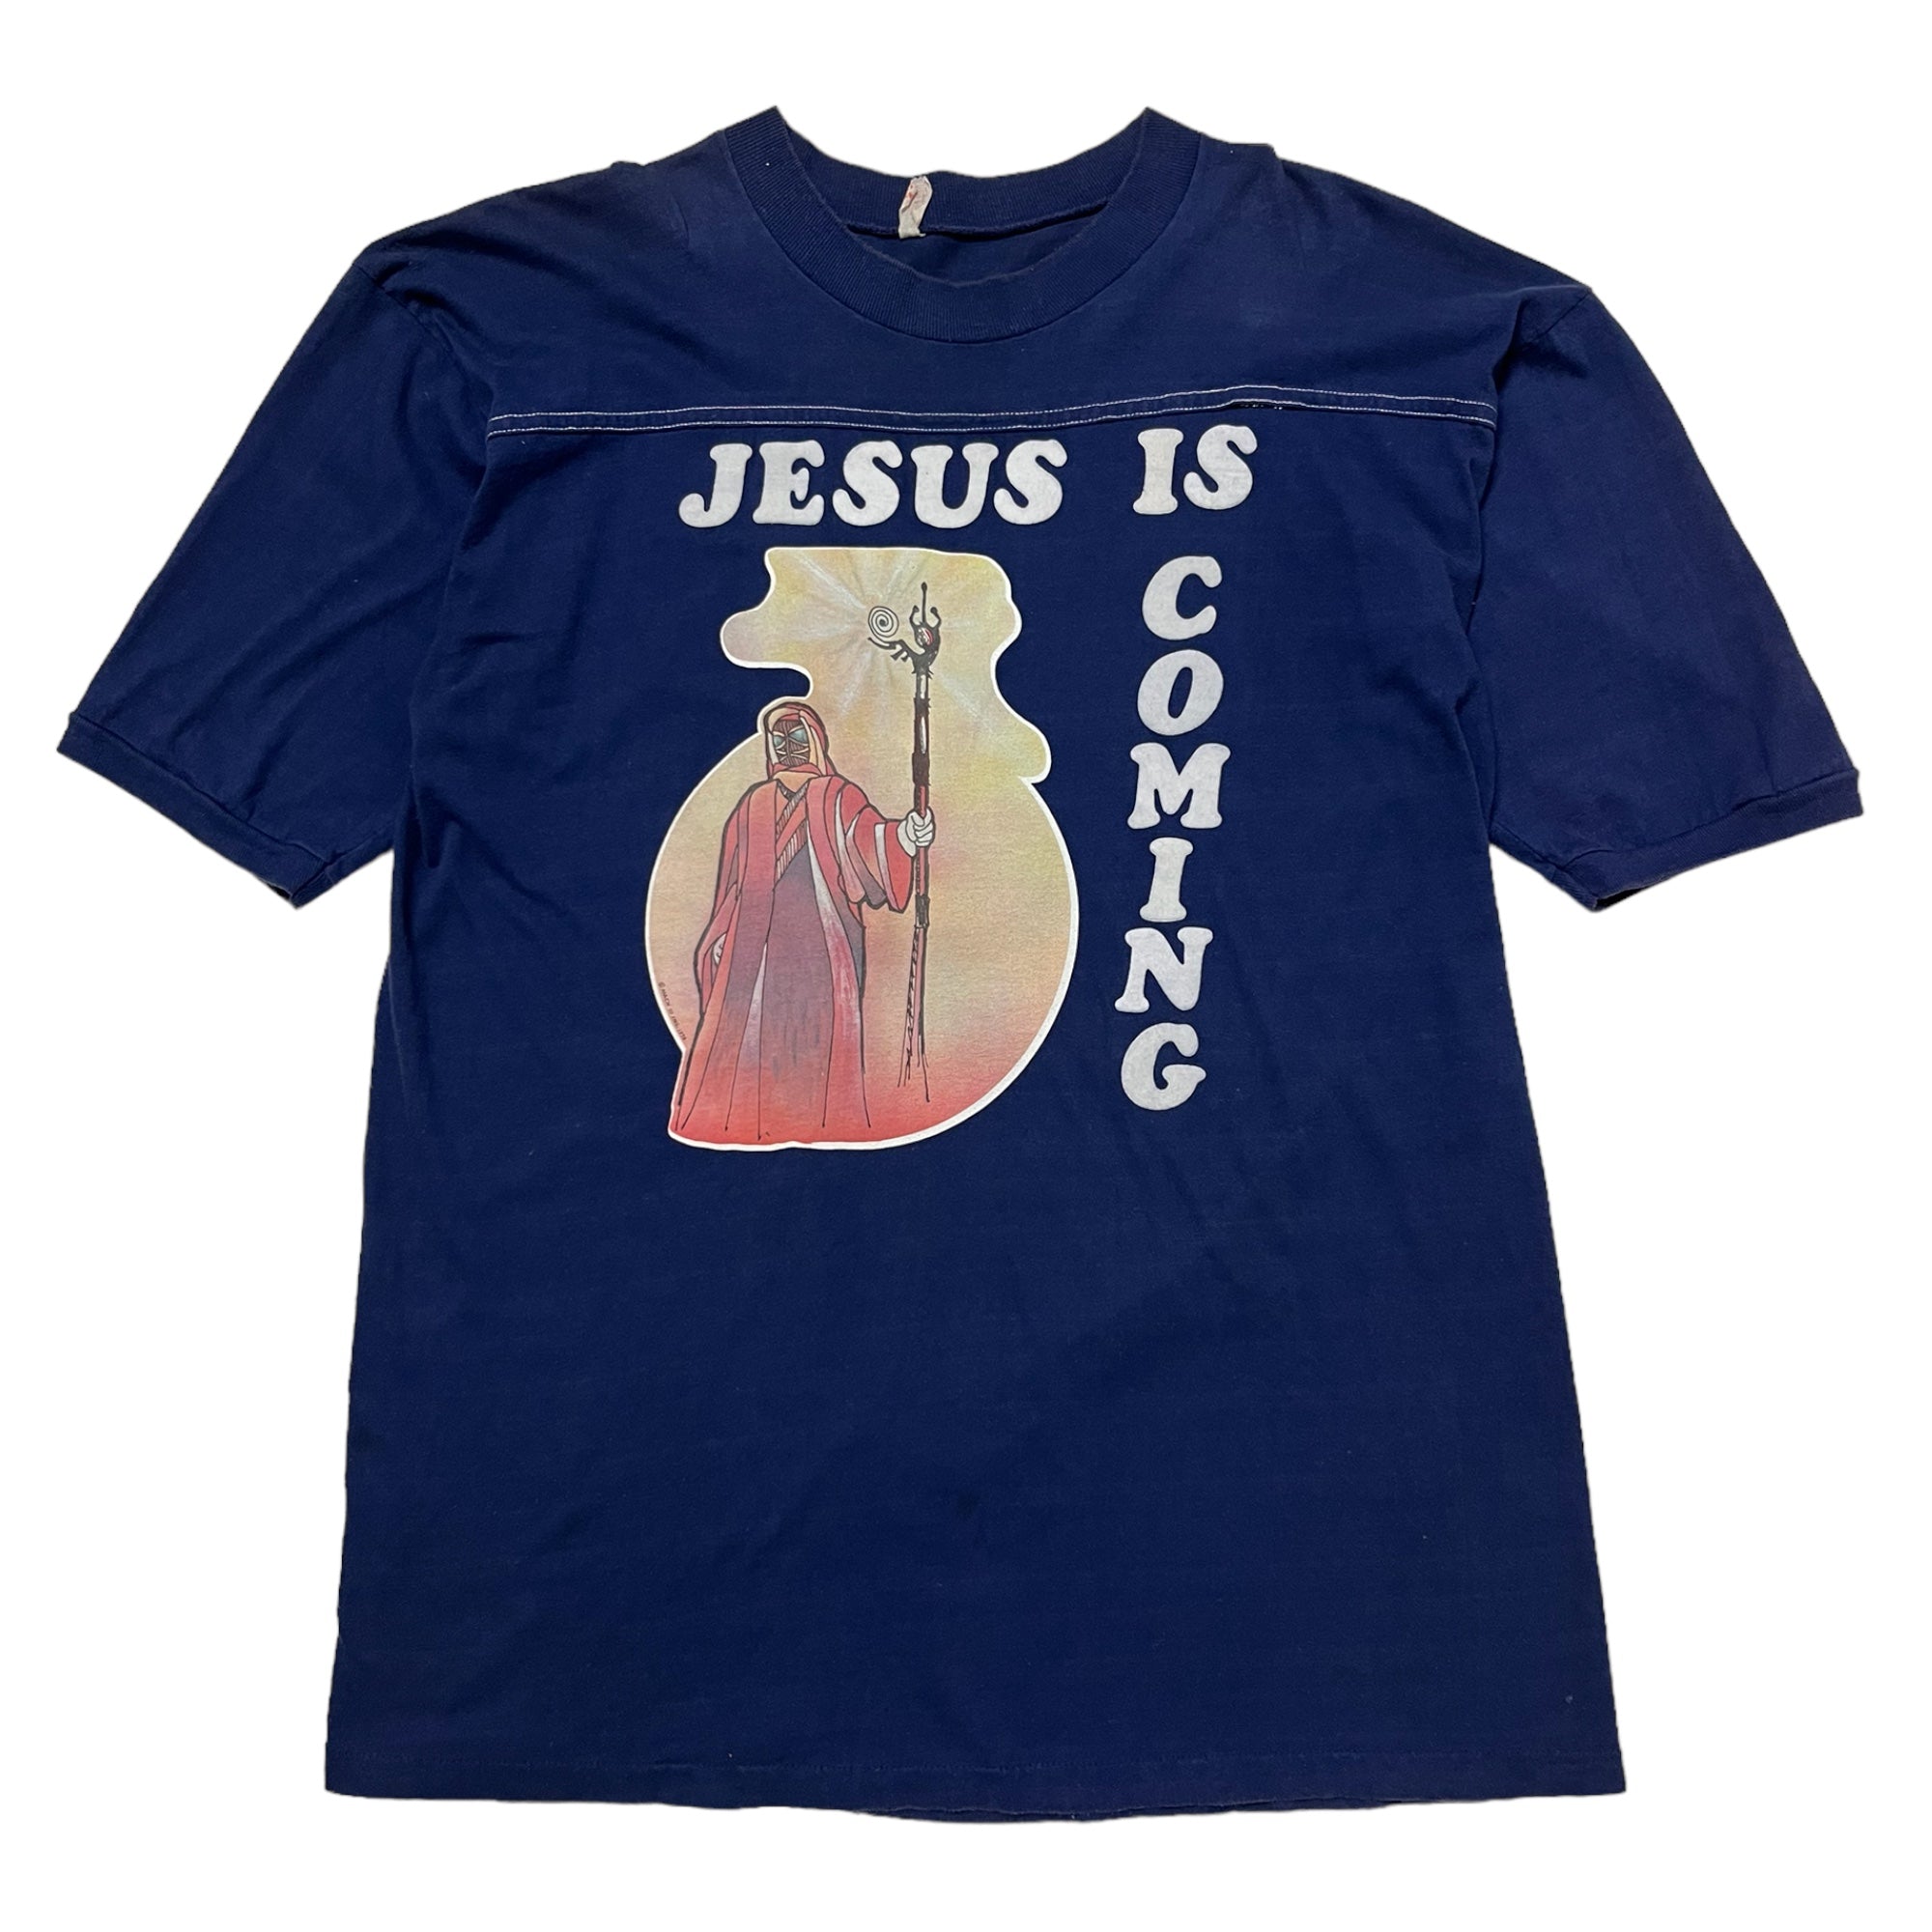 1970s ‘Jesus is Coming’ Flock Lettering Novelty Football T-Shirt - Navy - L/XL